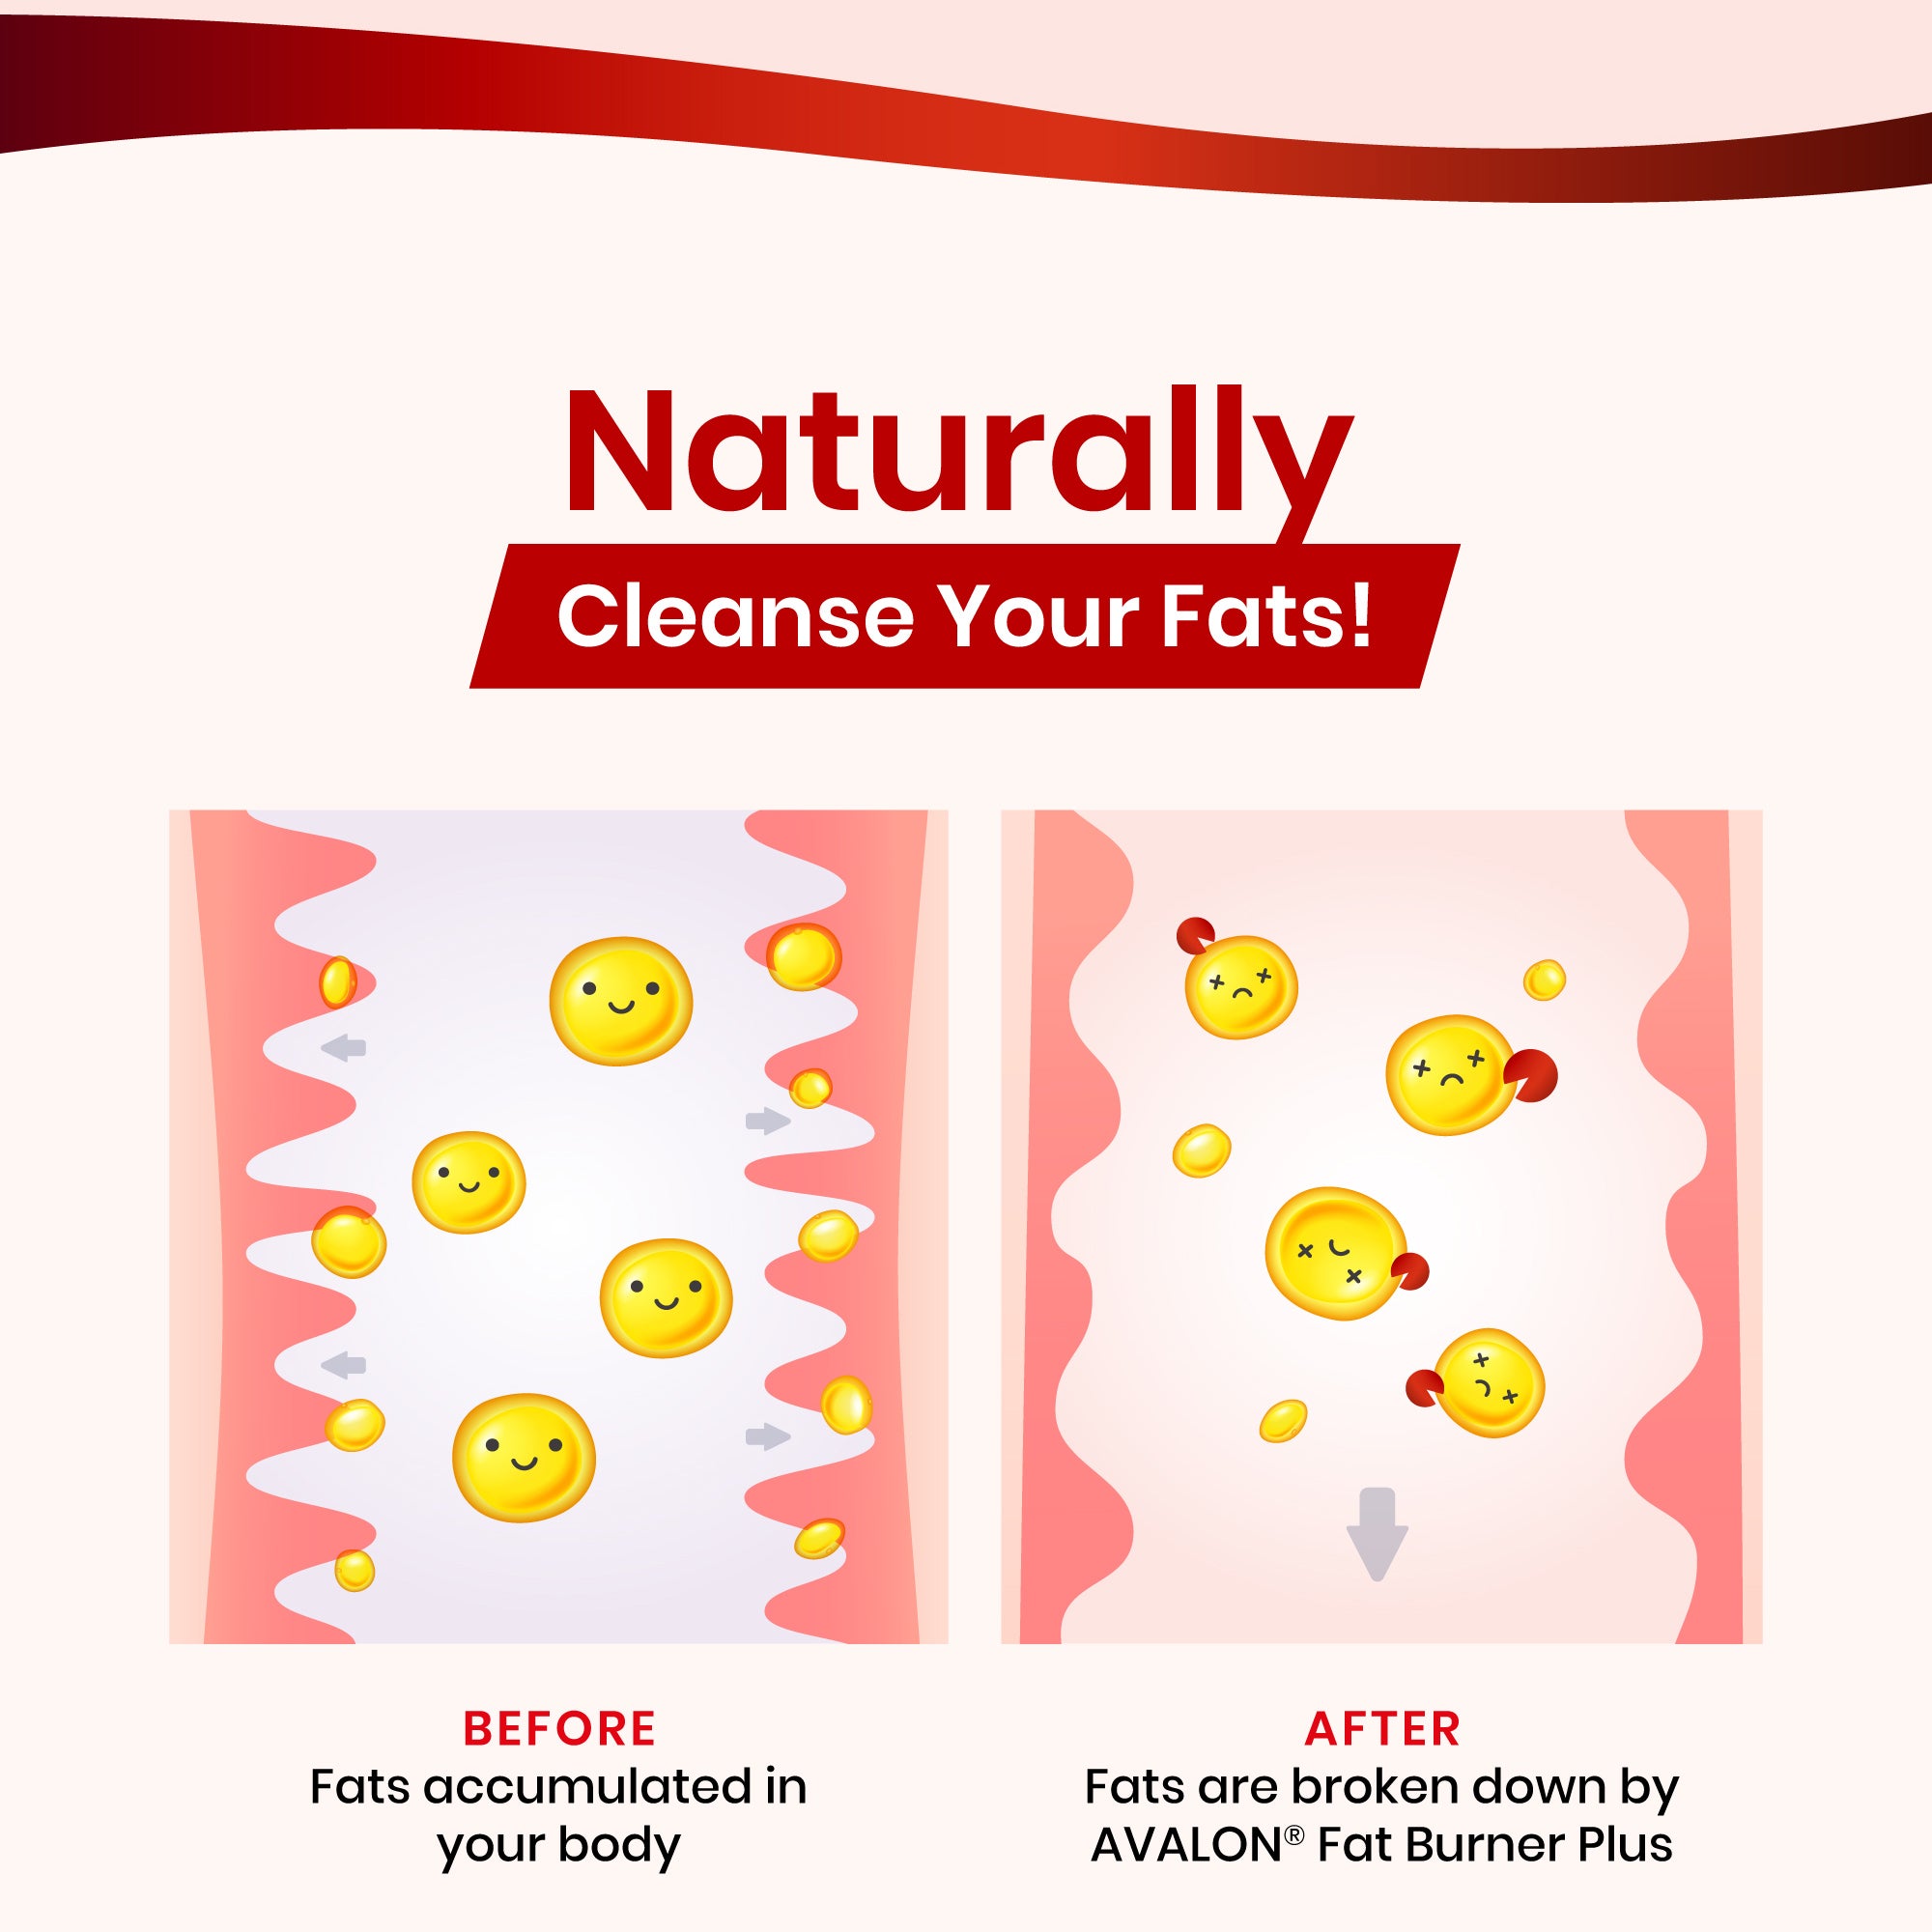 The amazing and potent ingredients of AVALON® Fat Burner Plus helps to break down and cleanse your fats naturally.